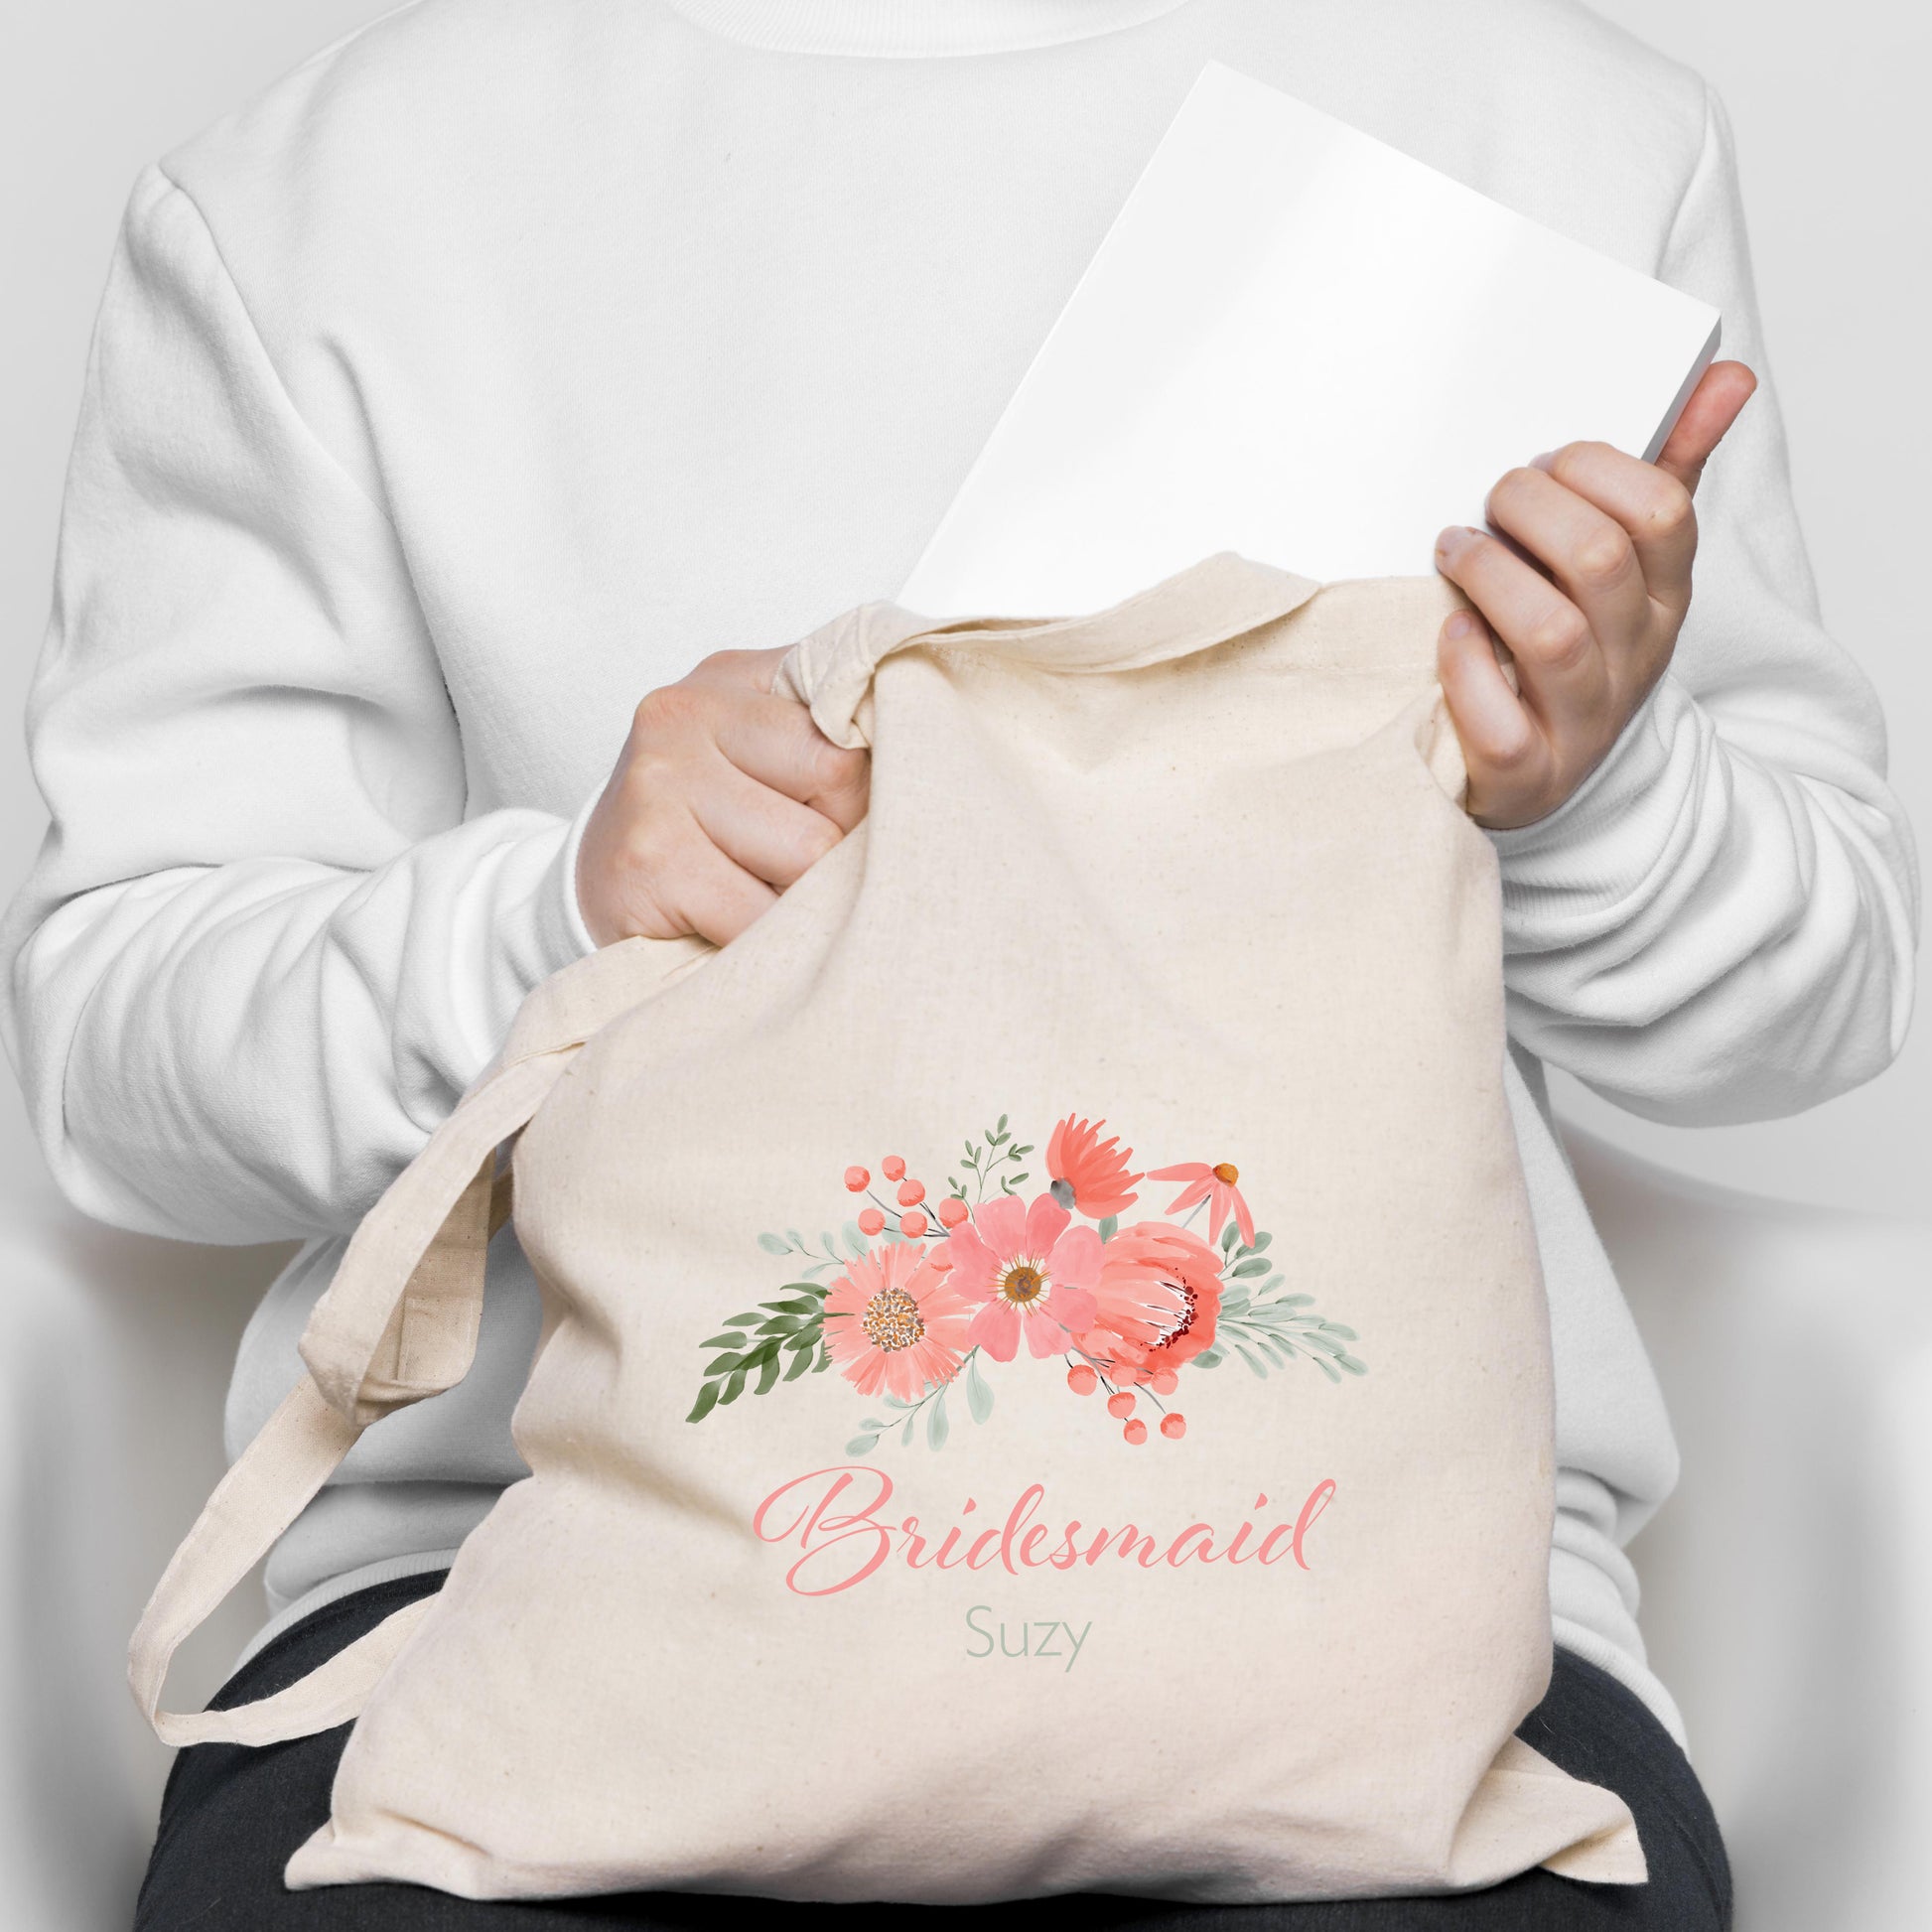 Personalised Bridal Party Tote Bag with Floral Design